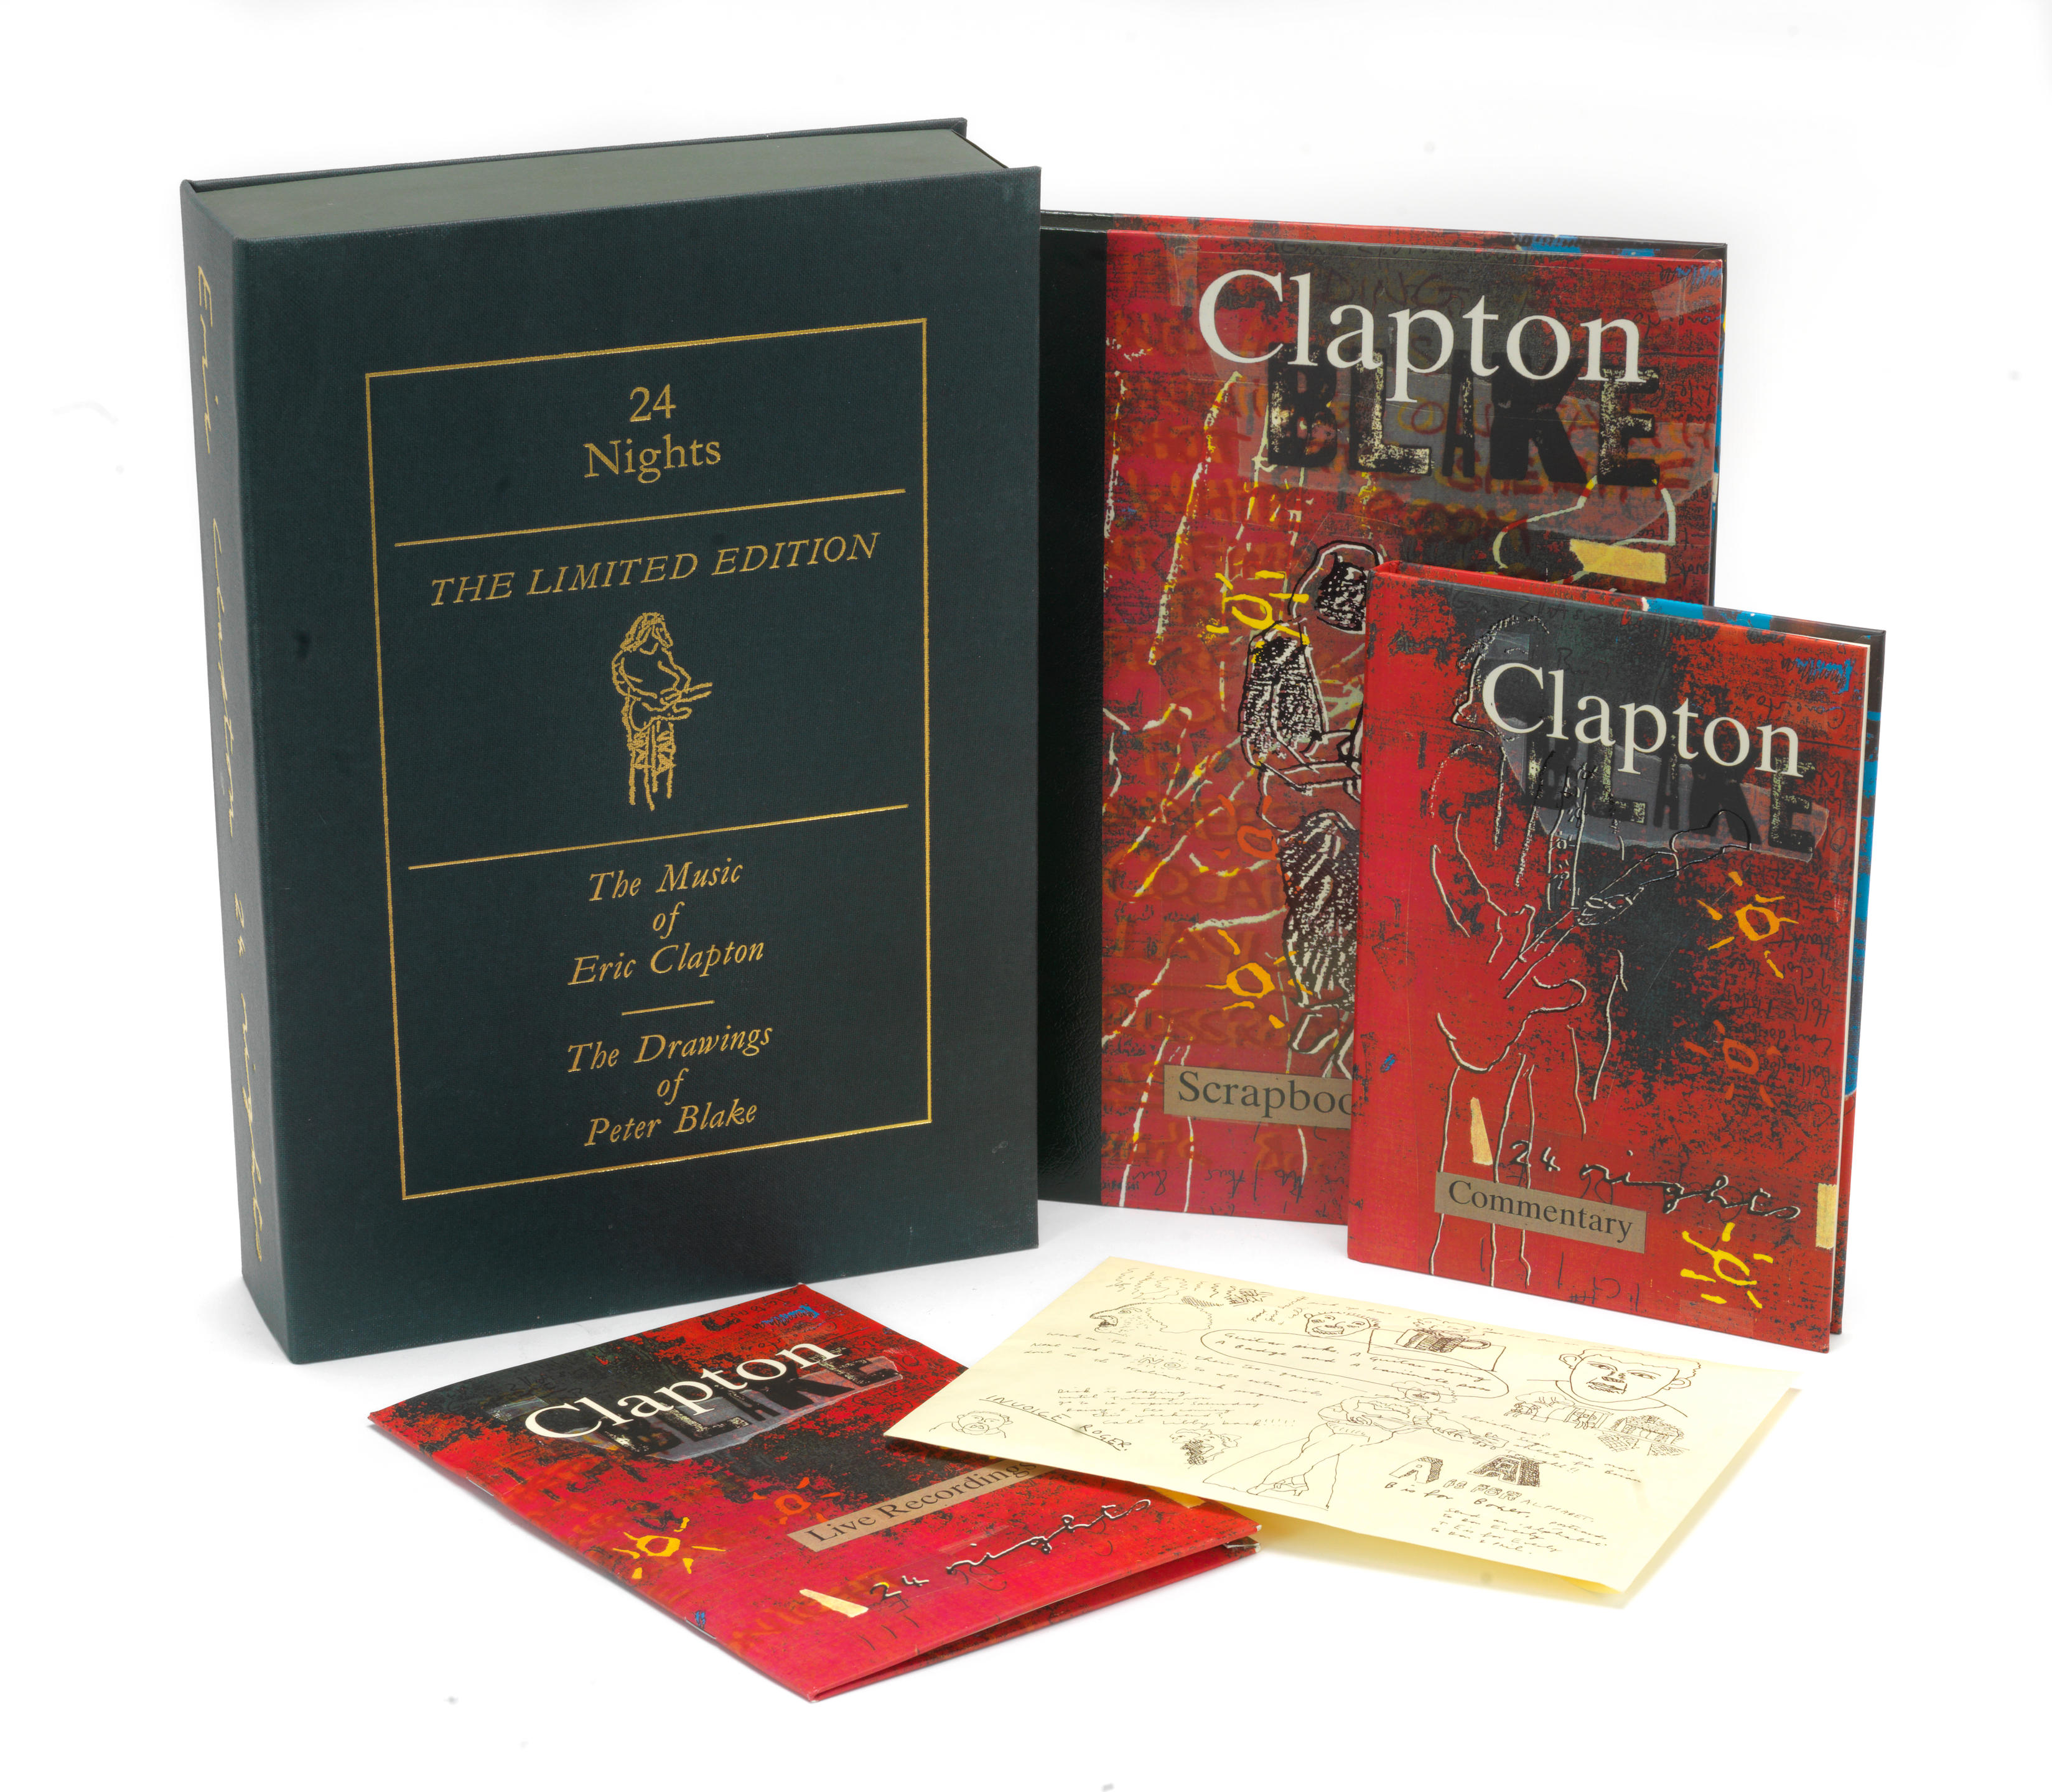 Eric Clapton: an autographed copy of '24 Nights' by Eric Clapton with...